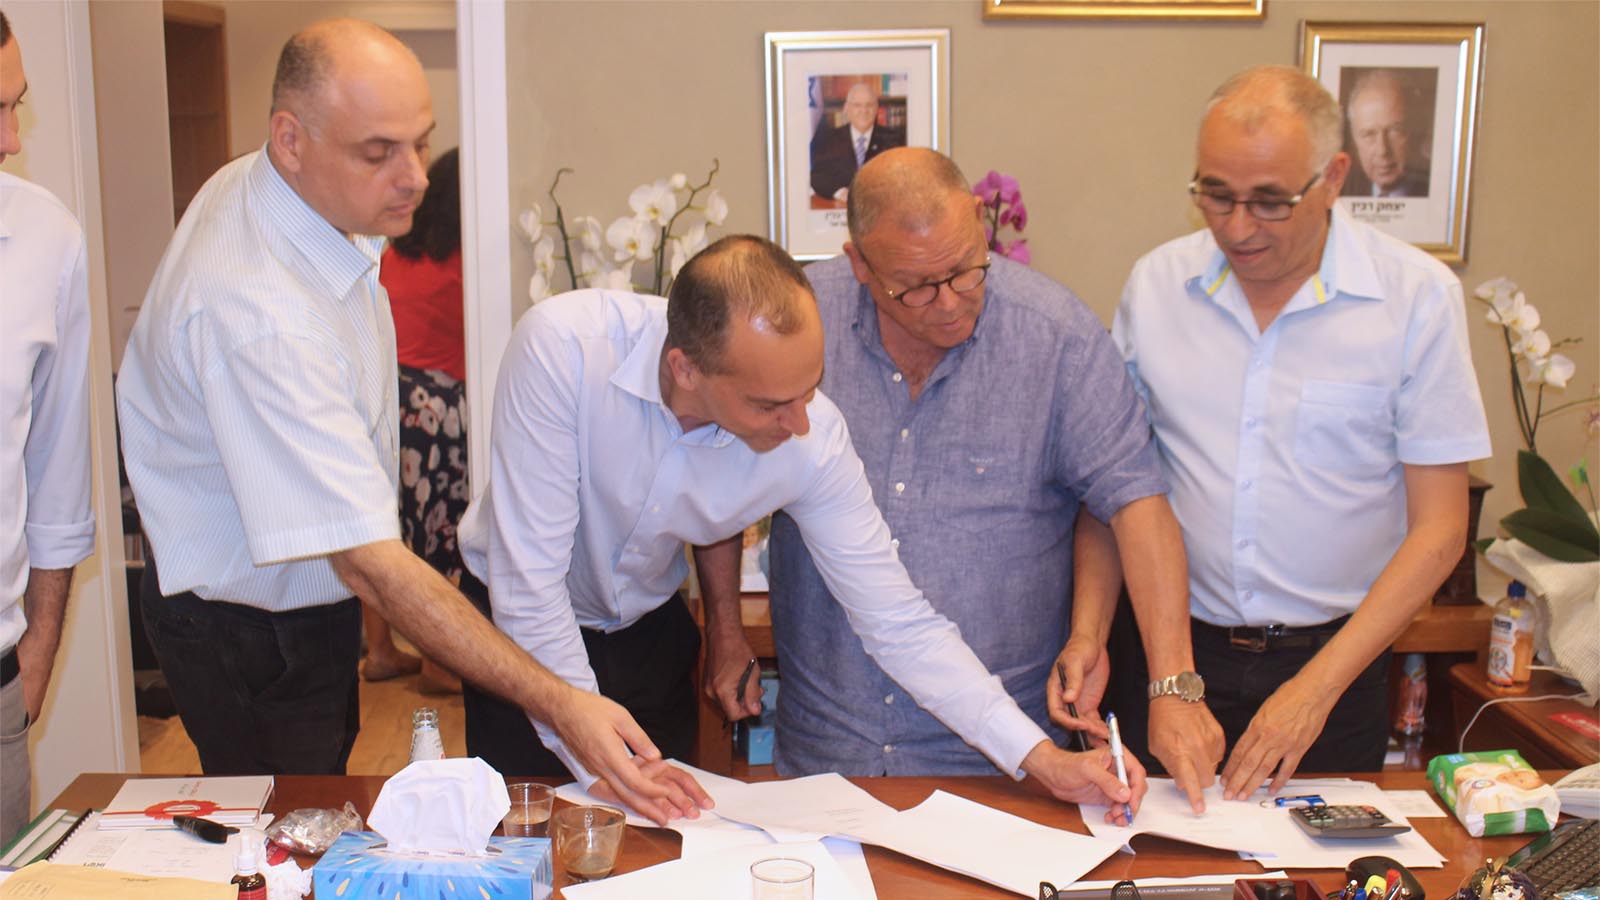 Signing the historic reform agreement at Mekorot.From left: Histadrut Hamaof Chairman Gil Bar-Tal, Mekorot CEO Eli Cohen, Histadrut Chairman Arnon Bar-David, Mekorot Workers’ Union Chairman Ilan Hilleli. Photo credit: Histadrut.